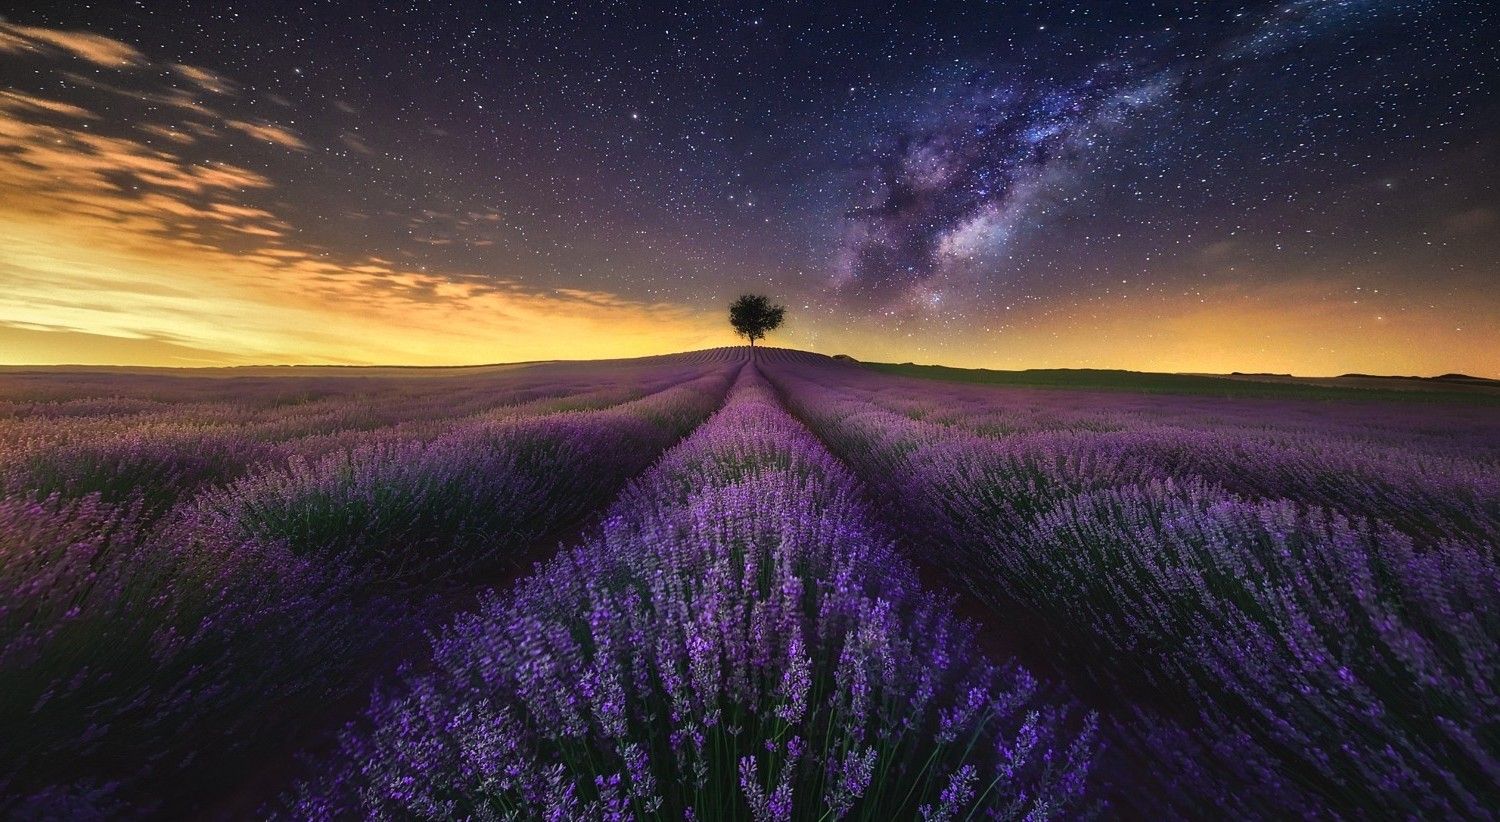 photography, Landscape, Nature, Lavender, Field, Flowers, Starry Night, Milky Way, Trees, Long Exposure, Lights, Clouds Wallpaper HD / Desktop and Mobile Background